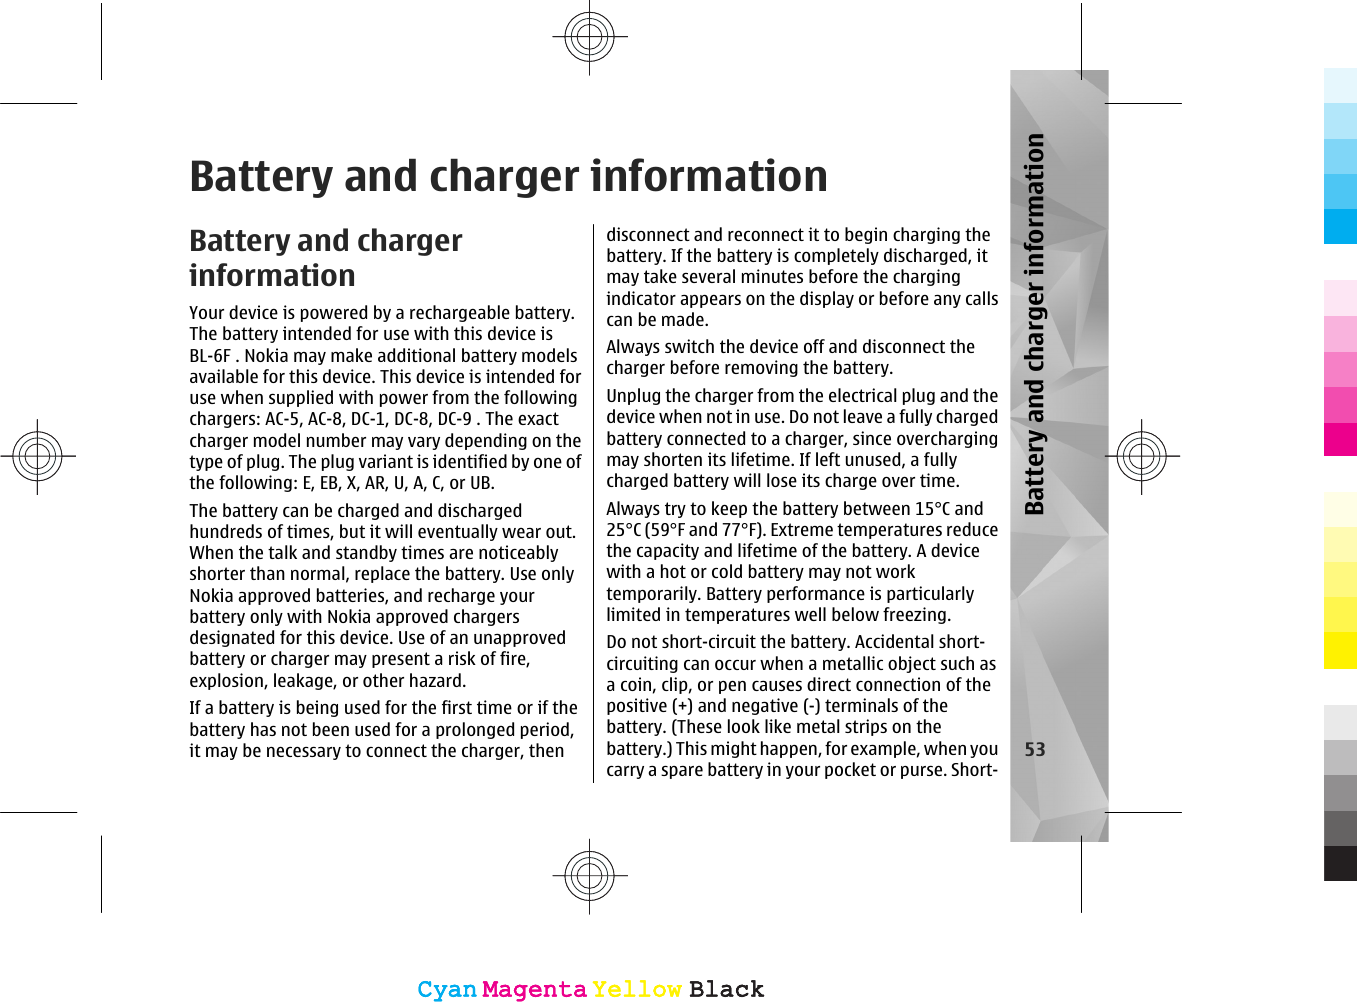 Battery and charger informationBattery and chargerinformationYour device is powered by a rechargeable battery.The battery intended for use with this device isBL-6F . Nokia may make additional battery modelsavailable for this device. This device is intended foruse when supplied with power from the followingchargers: AC-5, AC-8, DC-1, DC-8, DC-9 . The exactcharger model number may vary depending on thetype of plug. The plug variant is identified by one ofthe following: E, EB, X, AR, U, A, C, or UB.The battery can be charged and dischargedhundreds of times, but it will eventually wear out.When the talk and standby times are noticeablyshorter than normal, replace the battery. Use onlyNokia approved batteries, and recharge yourbattery only with Nokia approved chargersdesignated for this device. Use of an unapprovedbattery or charger may present a risk of fire,explosion, leakage, or other hazard.If a battery is being used for the first time or if thebattery has not been used for a prolonged period,it may be necessary to connect the charger, thendisconnect and reconnect it to begin charging thebattery. If the battery is completely discharged, itmay take several minutes before the chargingindicator appears on the display or before any callscan be made.Always switch the device off and disconnect thecharger before removing the battery.Unplug the charger from the electrical plug and thedevice when not in use. Do not leave a fully chargedbattery connected to a charger, since overchargingmay shorten its lifetime. If left unused, a fullycharged battery will lose its charge over time.Always try to keep the battery between 15°C and25°C (59°F and 77°F). Extreme temperatures reducethe capacity and lifetime of the battery. A devicewith a hot or cold battery may not worktemporarily. Battery performance is particularlylimited in temperatures well below freezing.Do not short-circuit the battery. Accidental short-circuiting can occur when a metallic object such asa coin, clip, or pen causes direct connection of thepositive (+) and negative (-) terminals of thebattery. (These look like metal strips on thebattery.) This might happen, for example, when youcarry a spare battery in your pocket or purse. Short-53Battery and charger informationCyanCyanMagentaMagentaYellowYellowBlackBlackCyanCyanMagentaMagentaYellowYellowBlackBlack